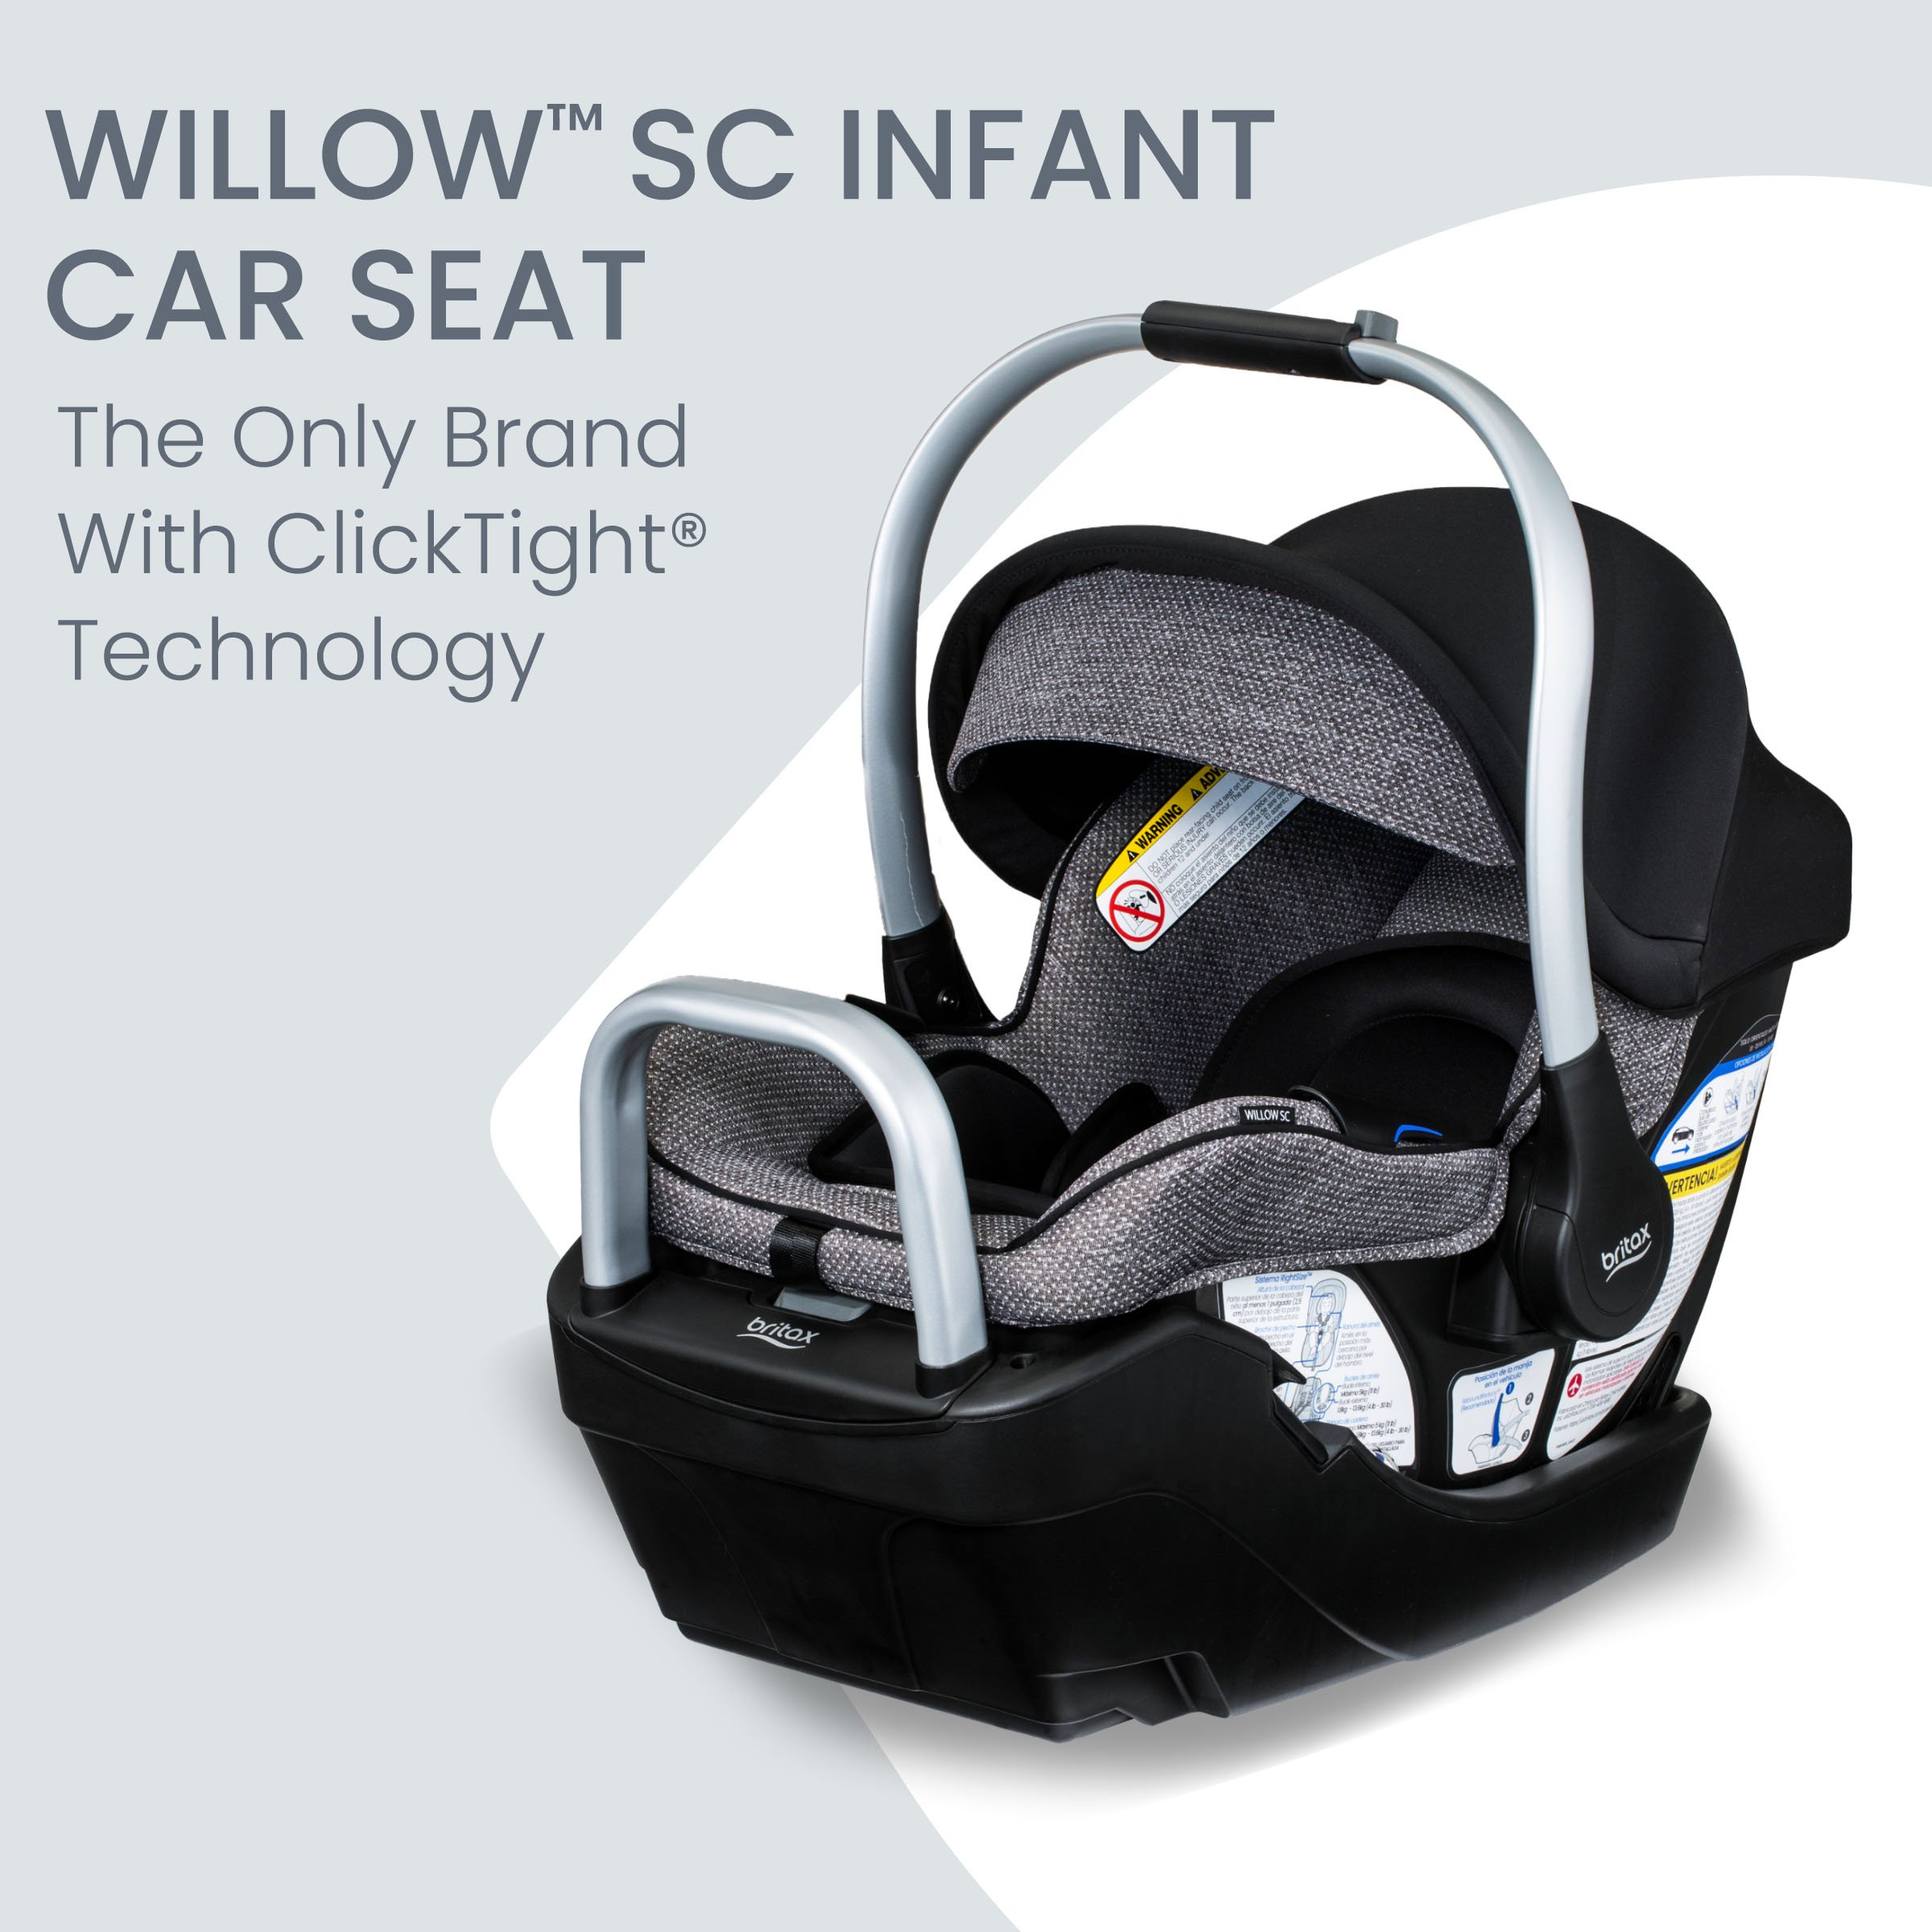 Willow SC Infant Car Seat the Only Brand with ClickTight Technology (Copy)